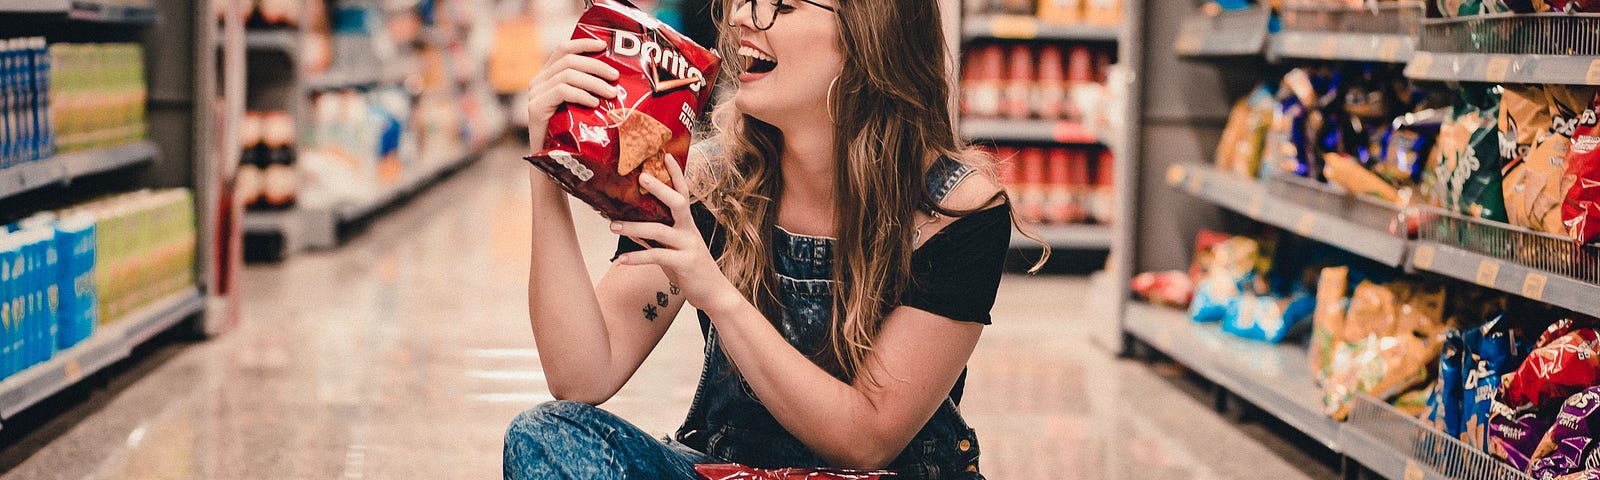 Woman eating chips in supermarket